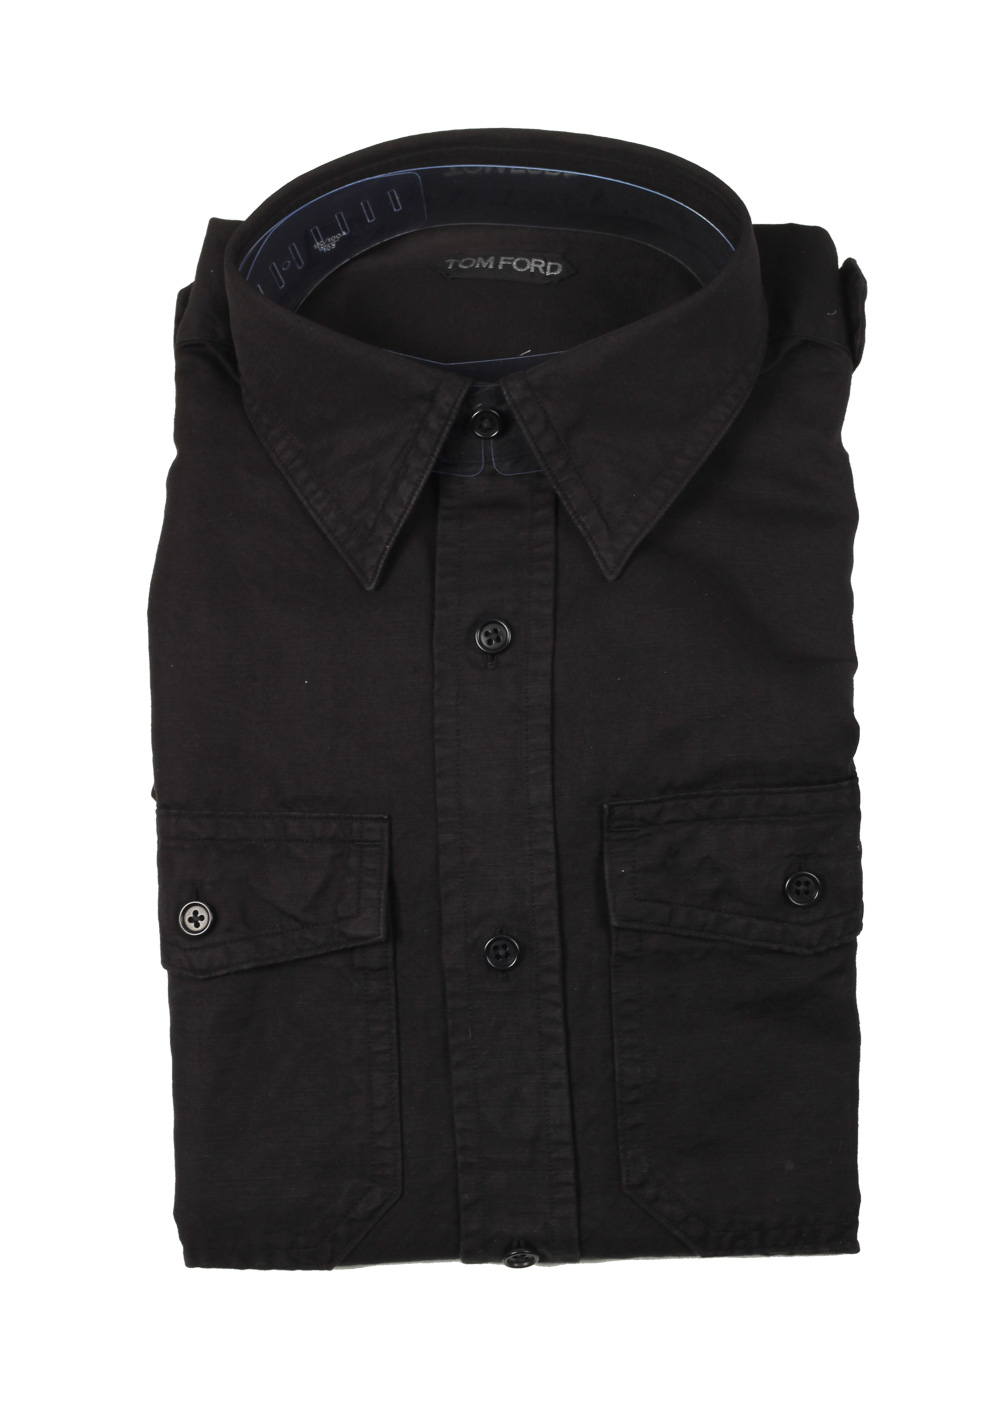 TOM FORD Solid Black Casual Shirt Size 39 / 15,5 U.S. | Costume Limité